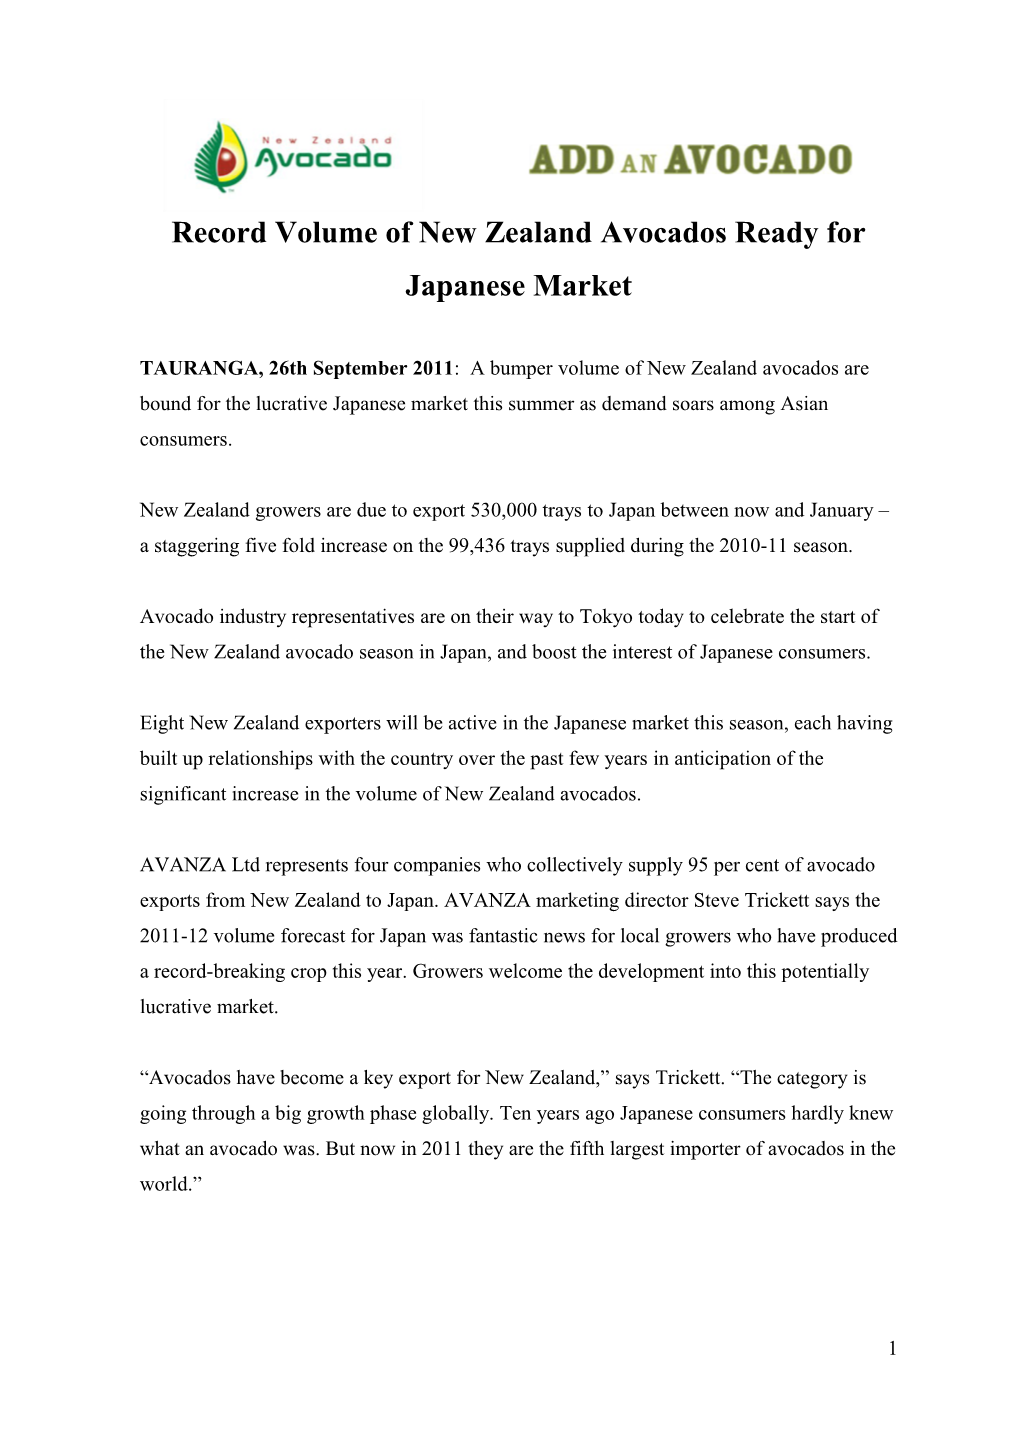 Record Volume of New Zealand Avocados Ready for Japanese Market